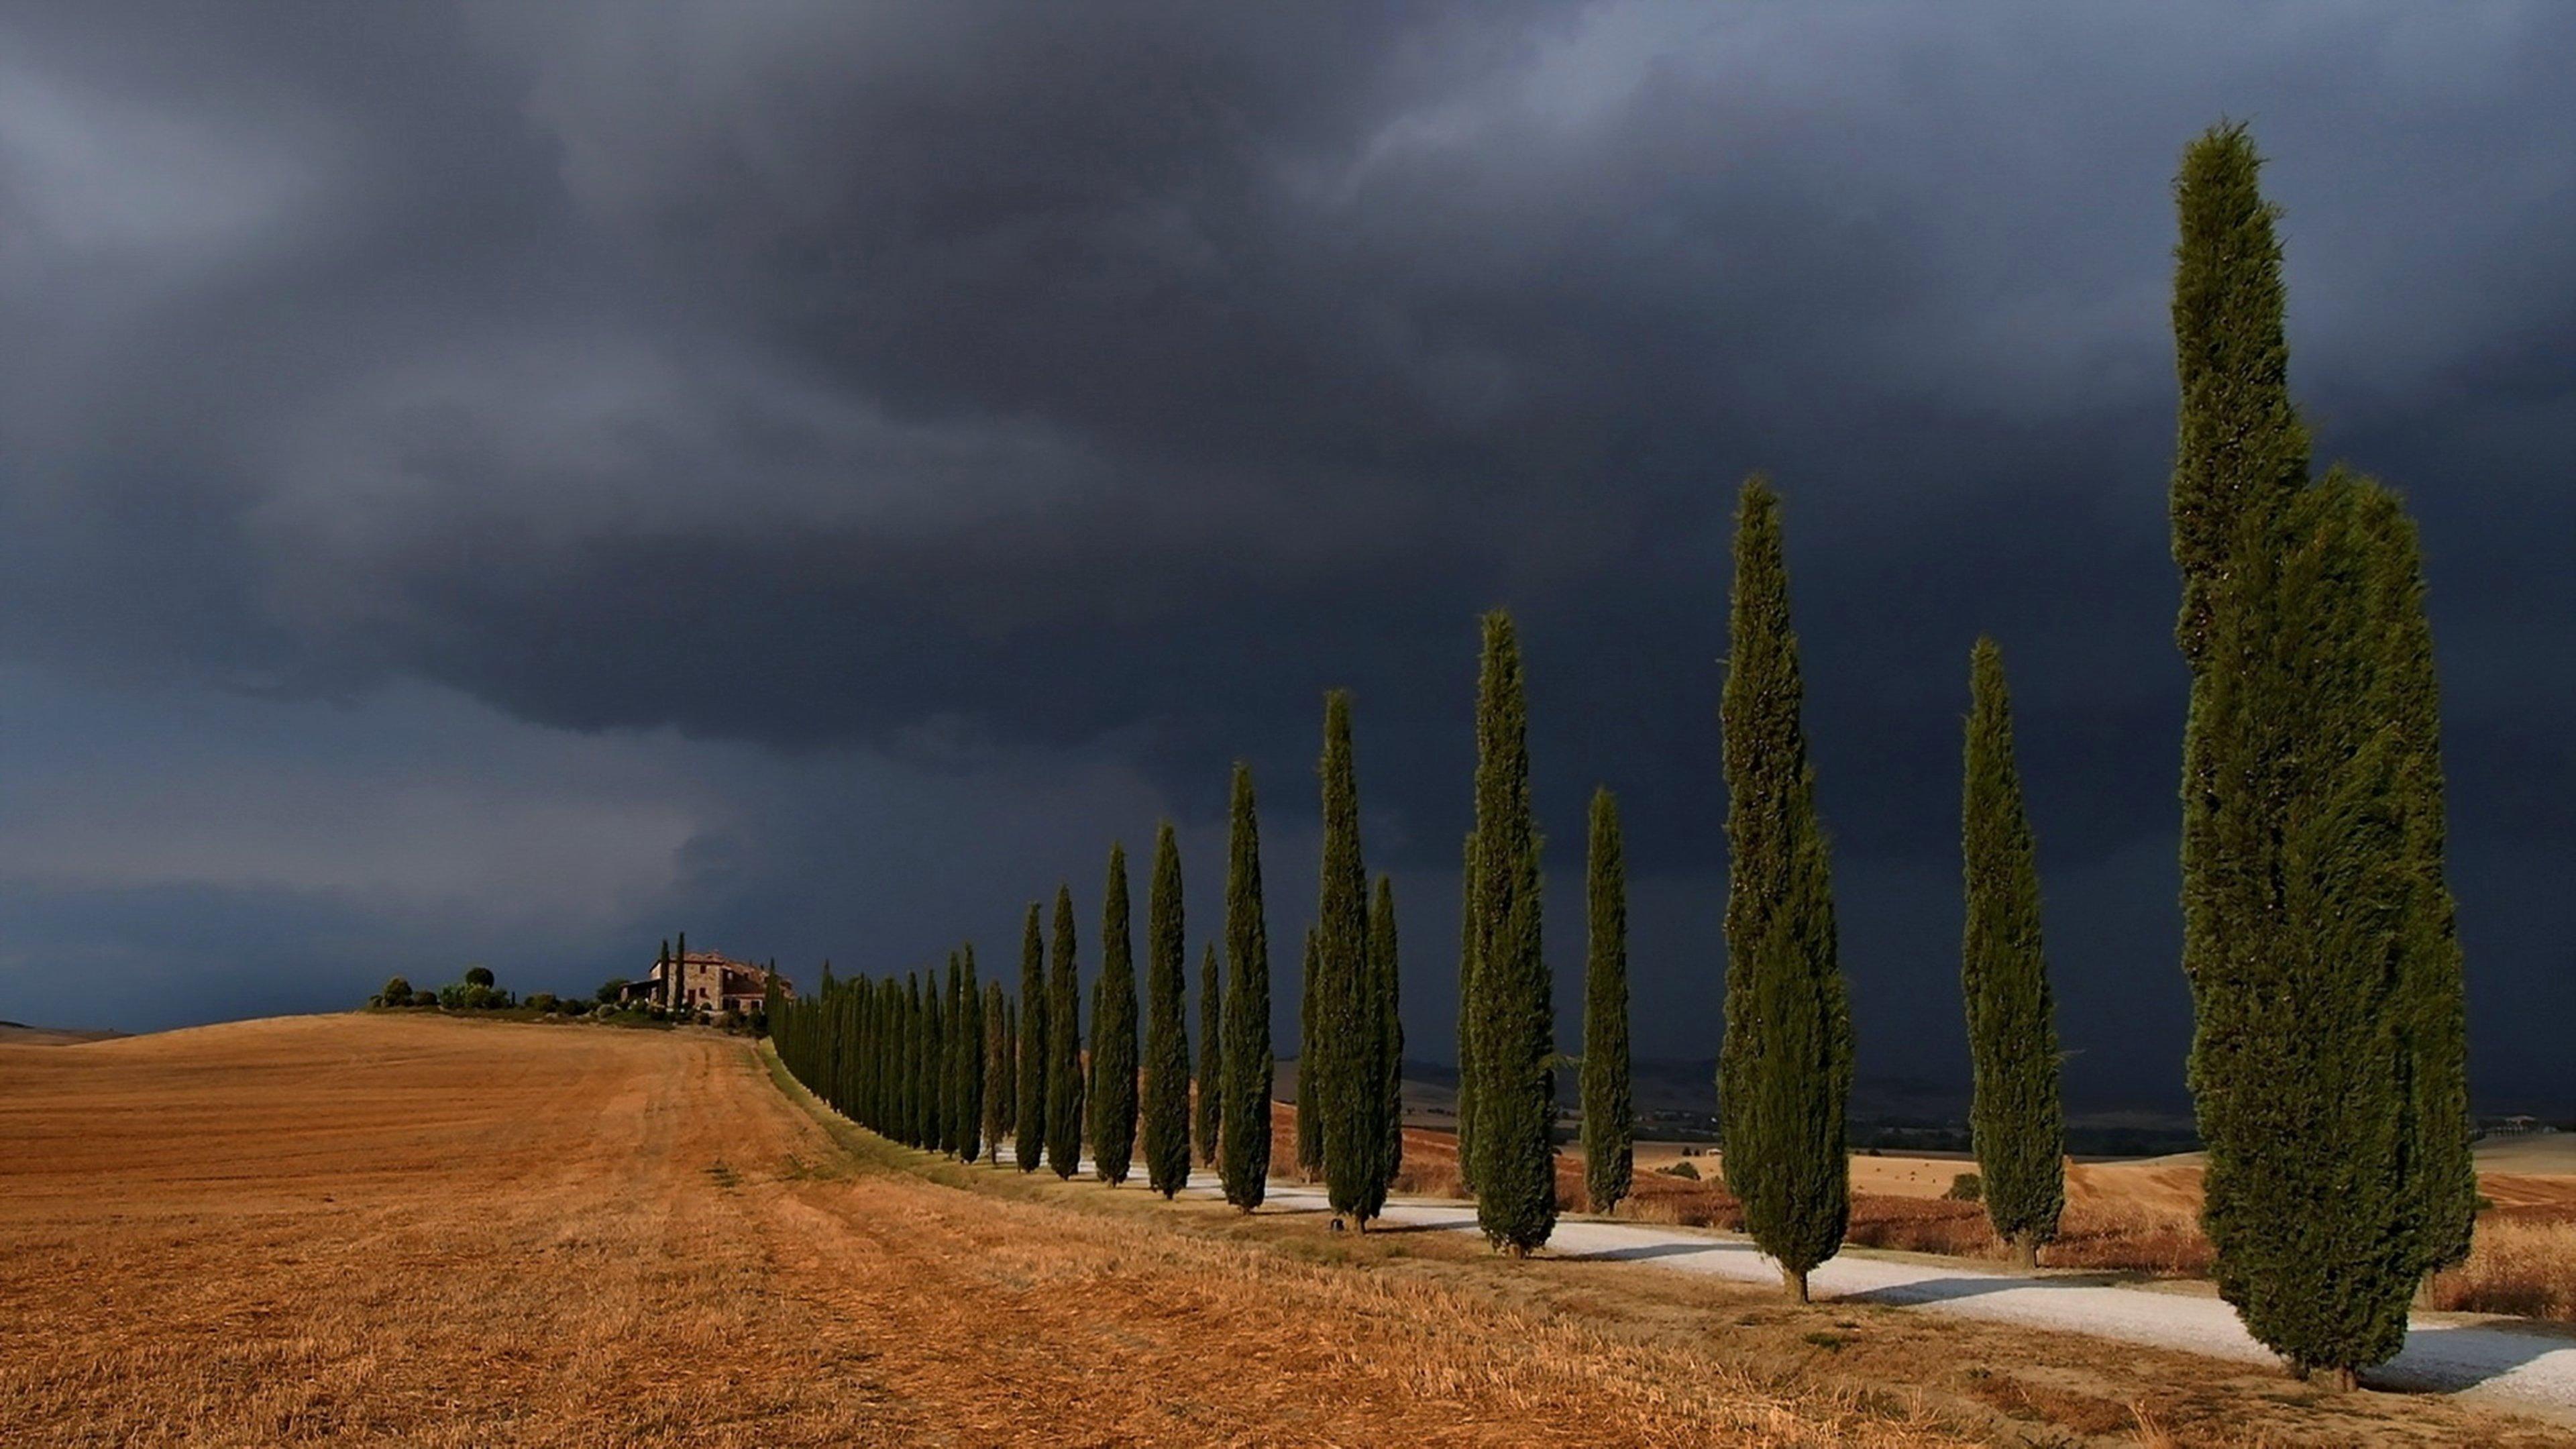 storm, Val, Dand039orcia, Trees, Road, Sky, Landscape